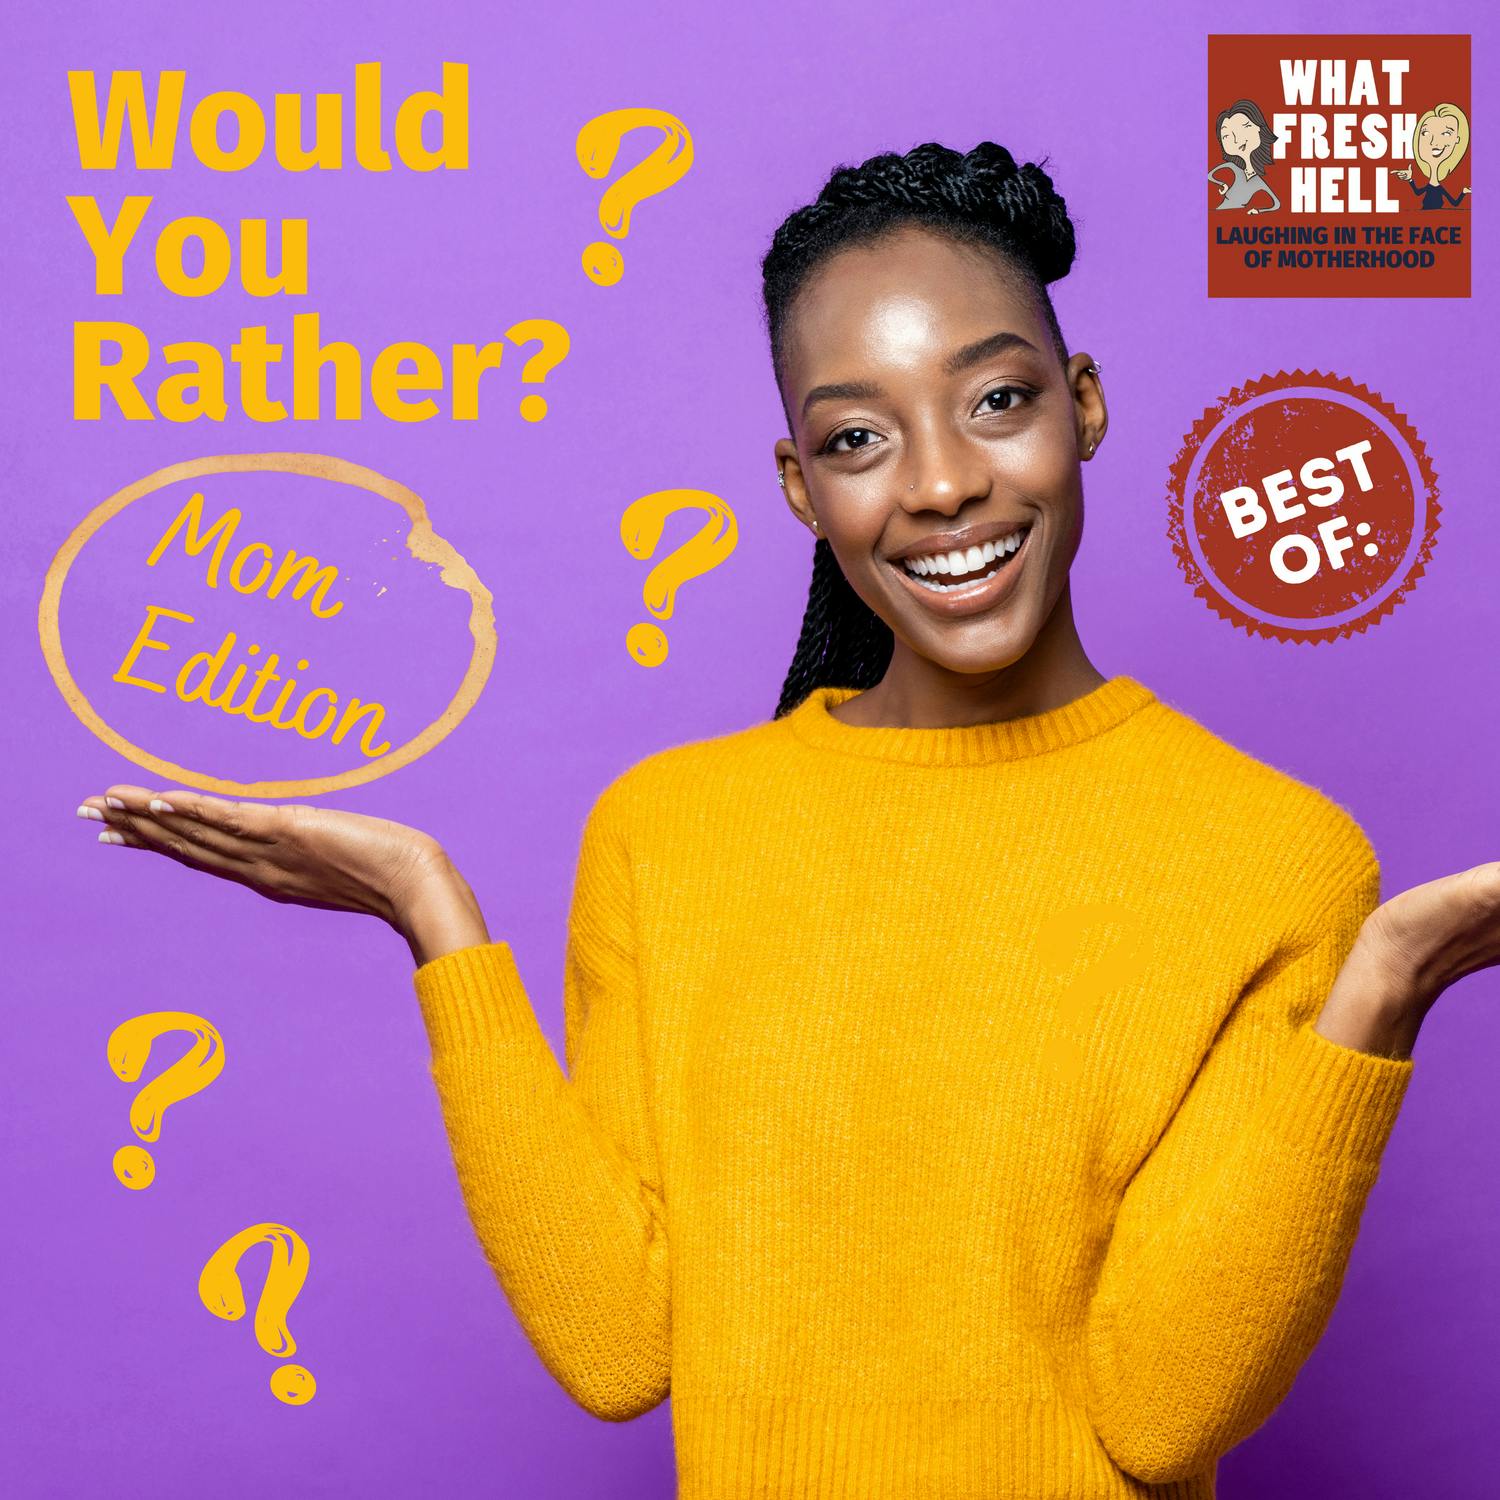 BEST OF: Would You Rather...?  (Mom Edition)